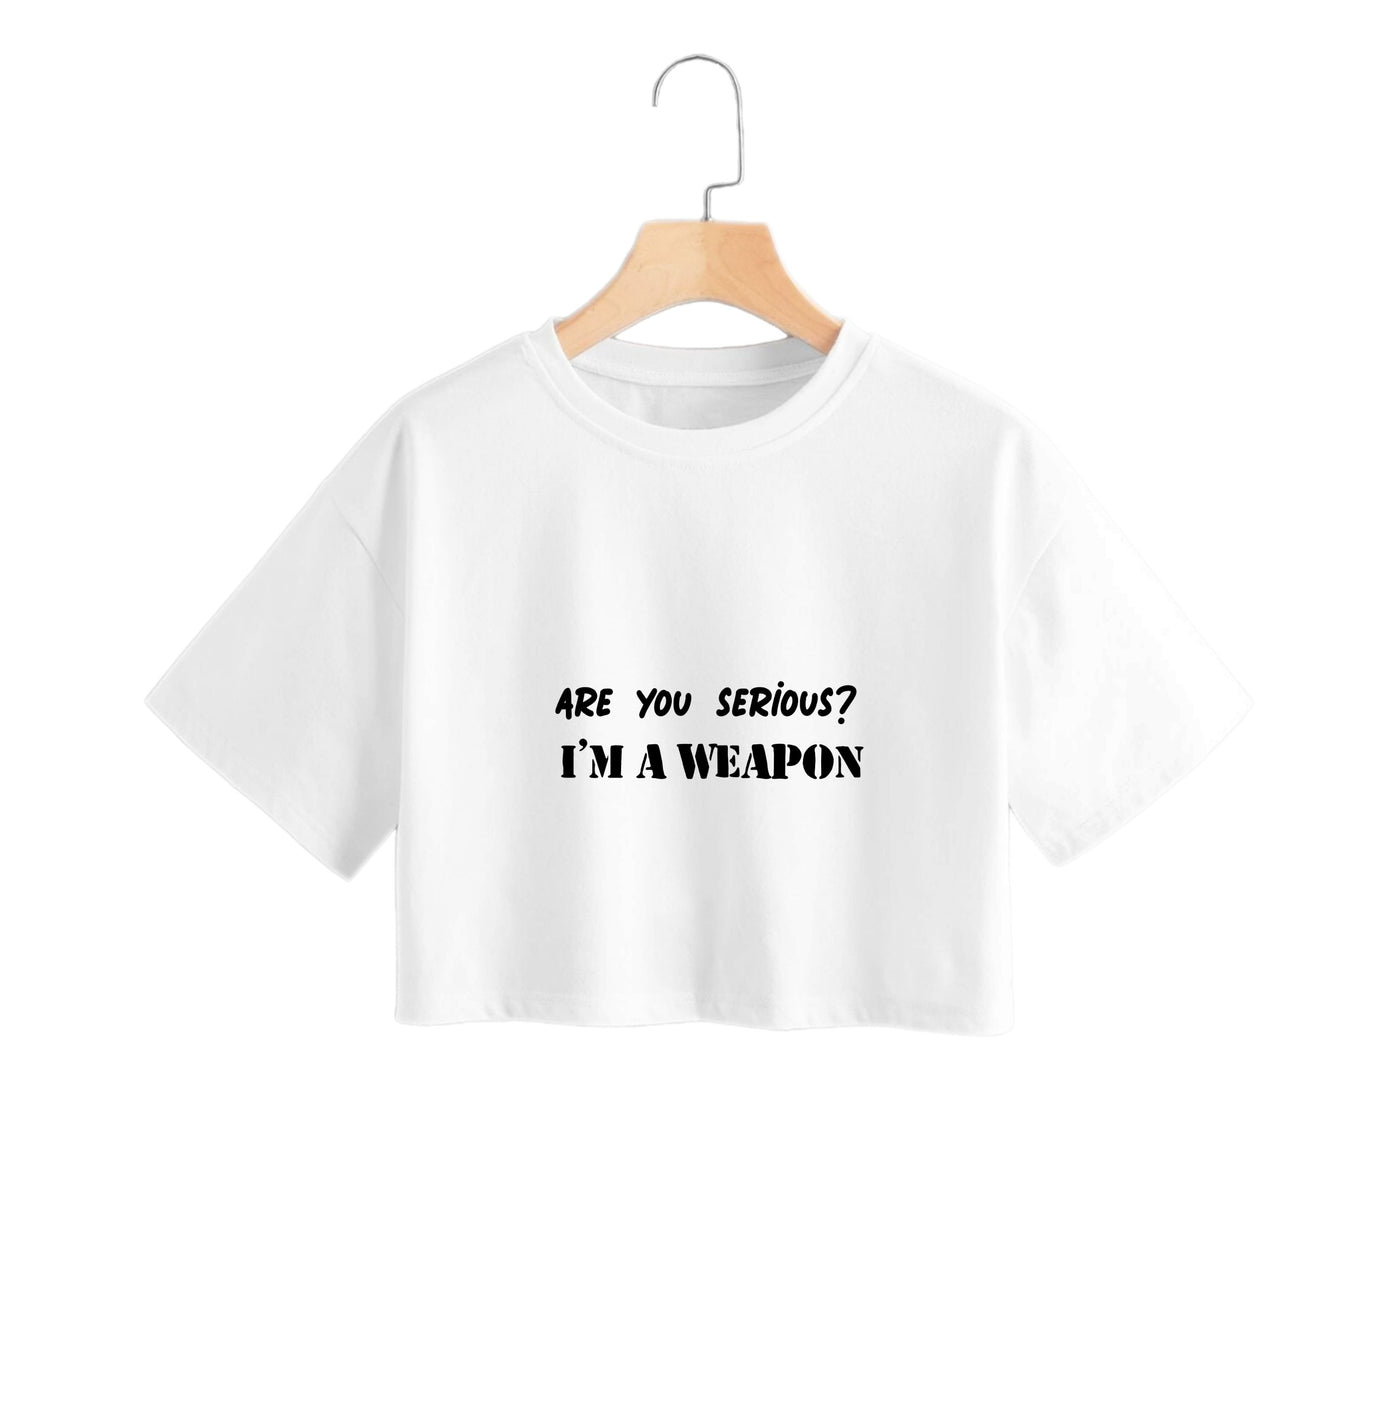 Are You Serious? I'm A Weapon - Islanders Crop Top